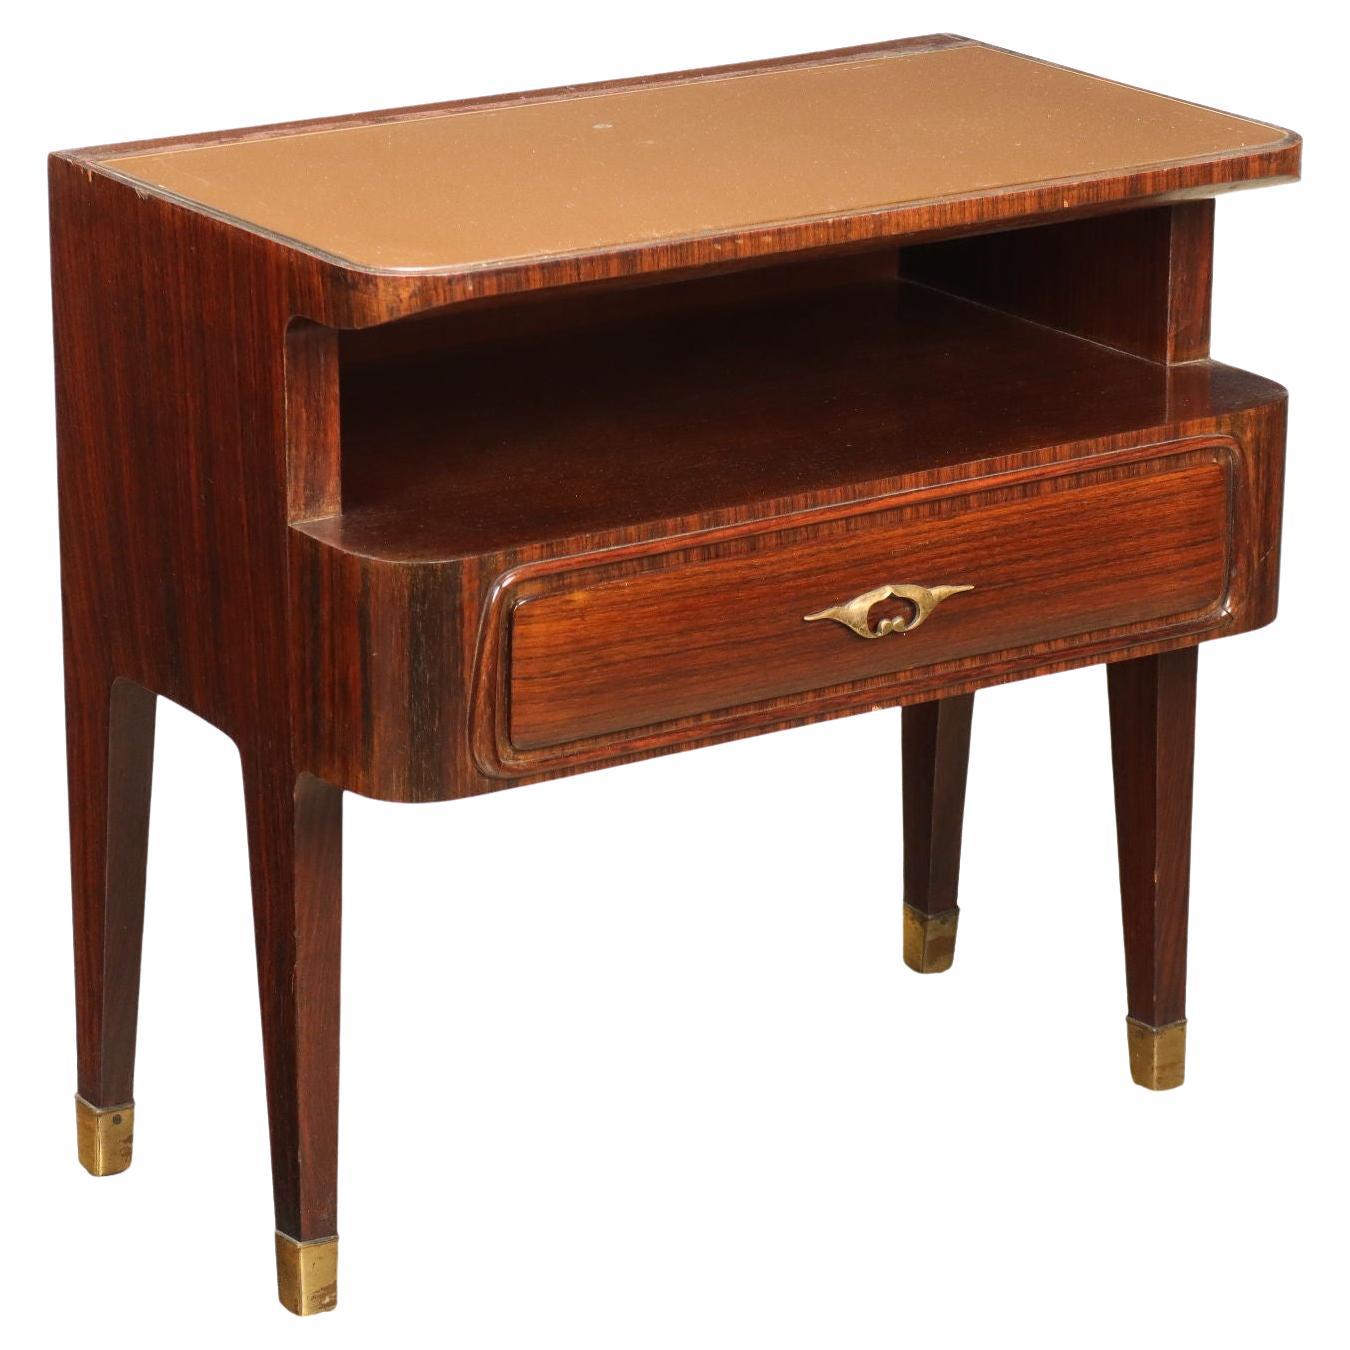 Bedside table 50s-60s